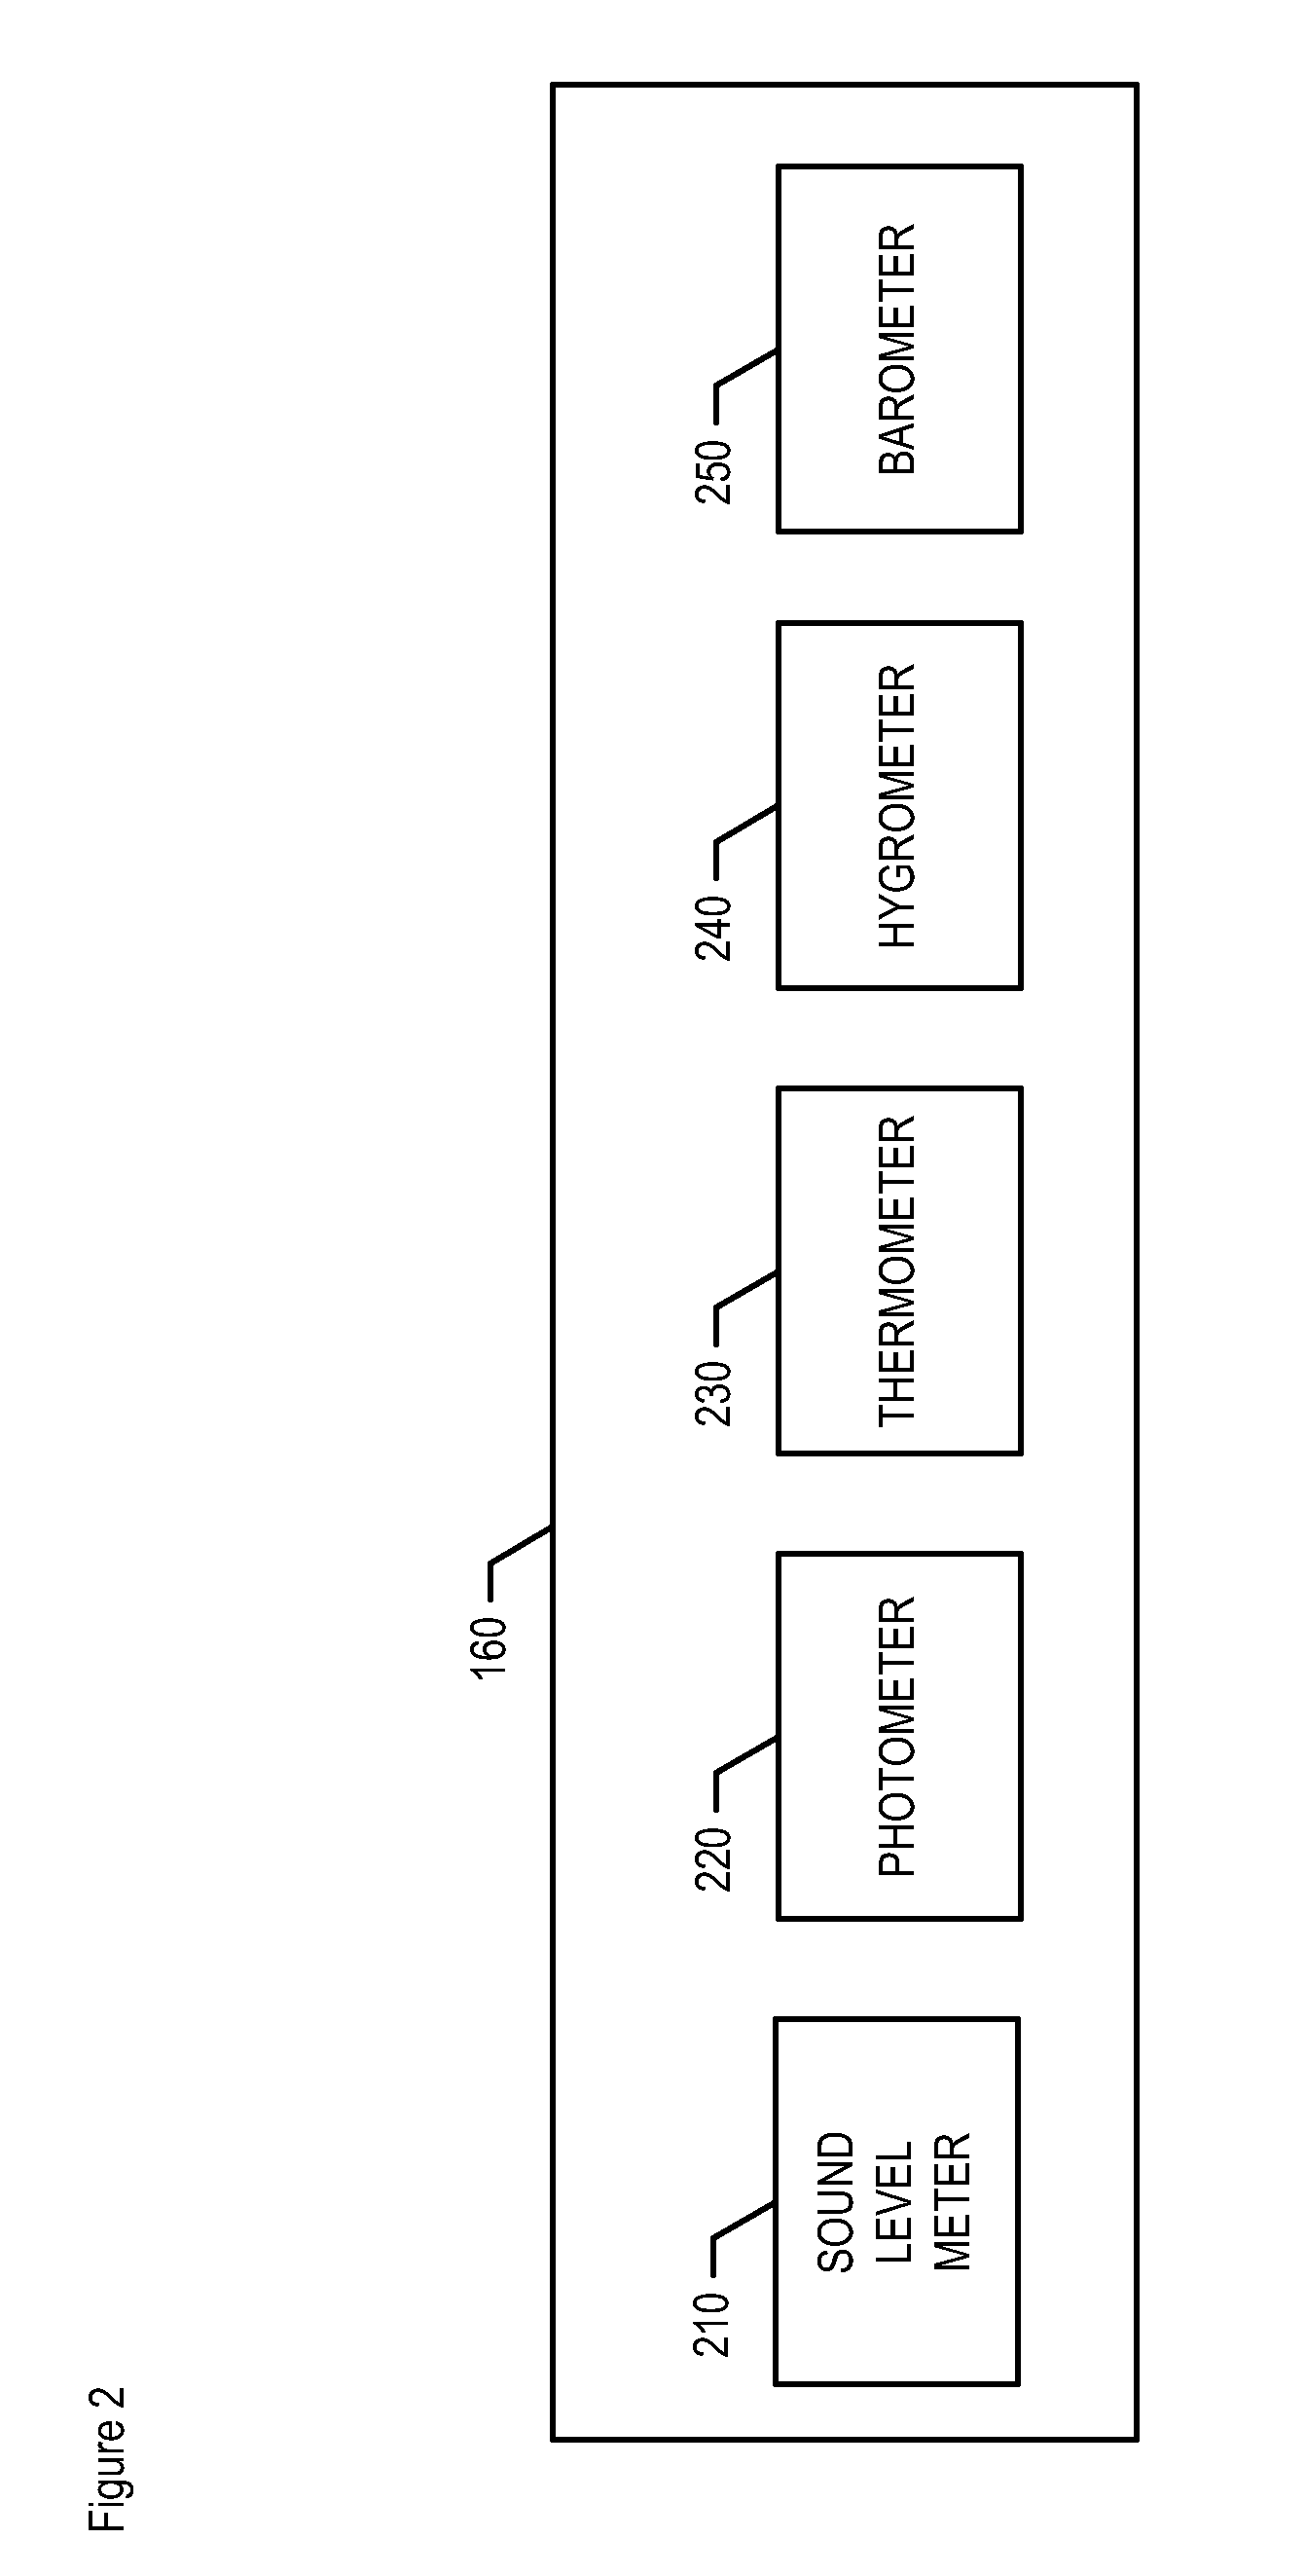 Authentication frequency and challenge type based on environmental and physiological properties